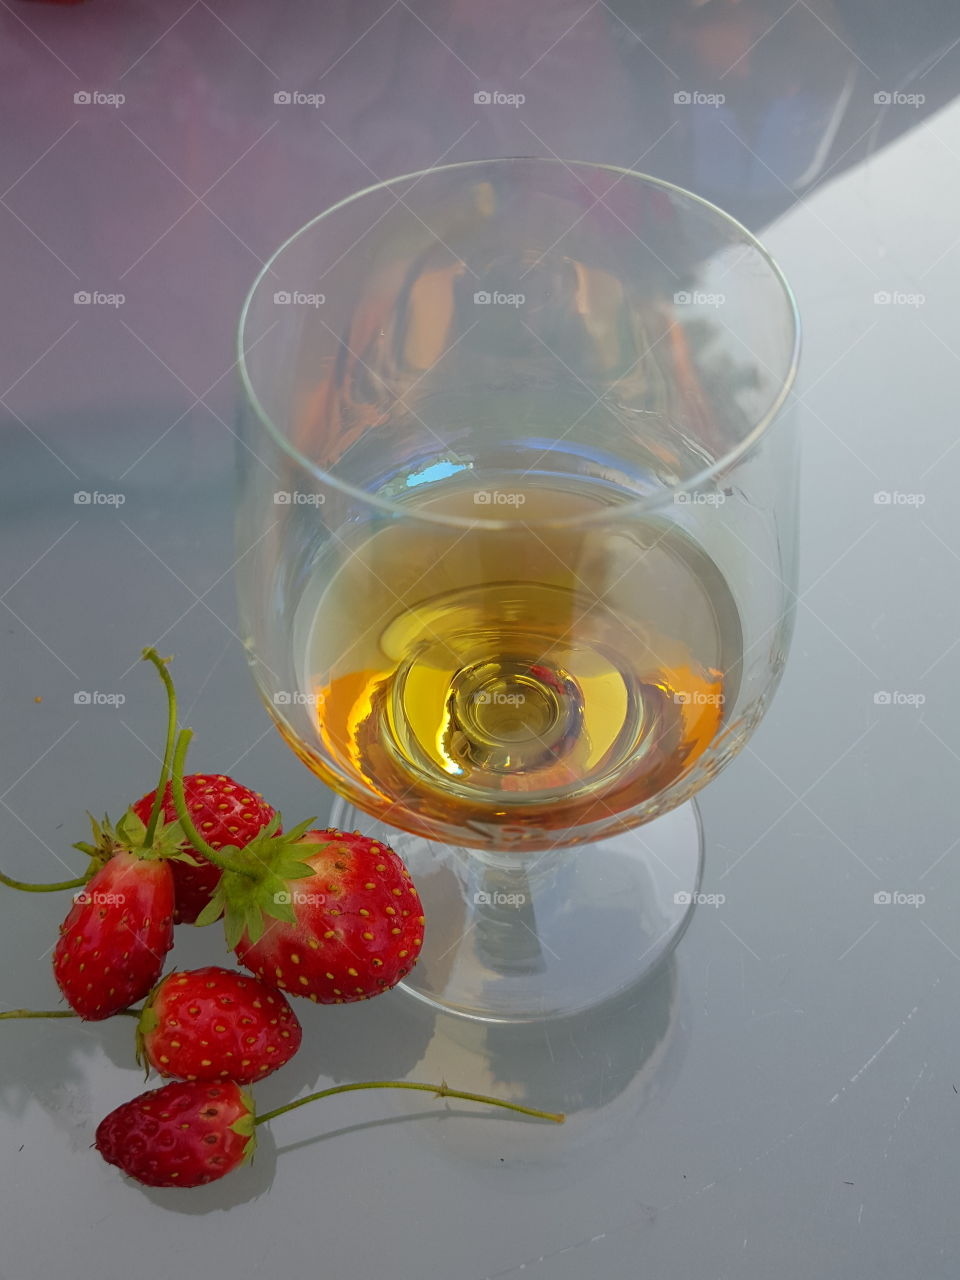 liqueur and strawberries